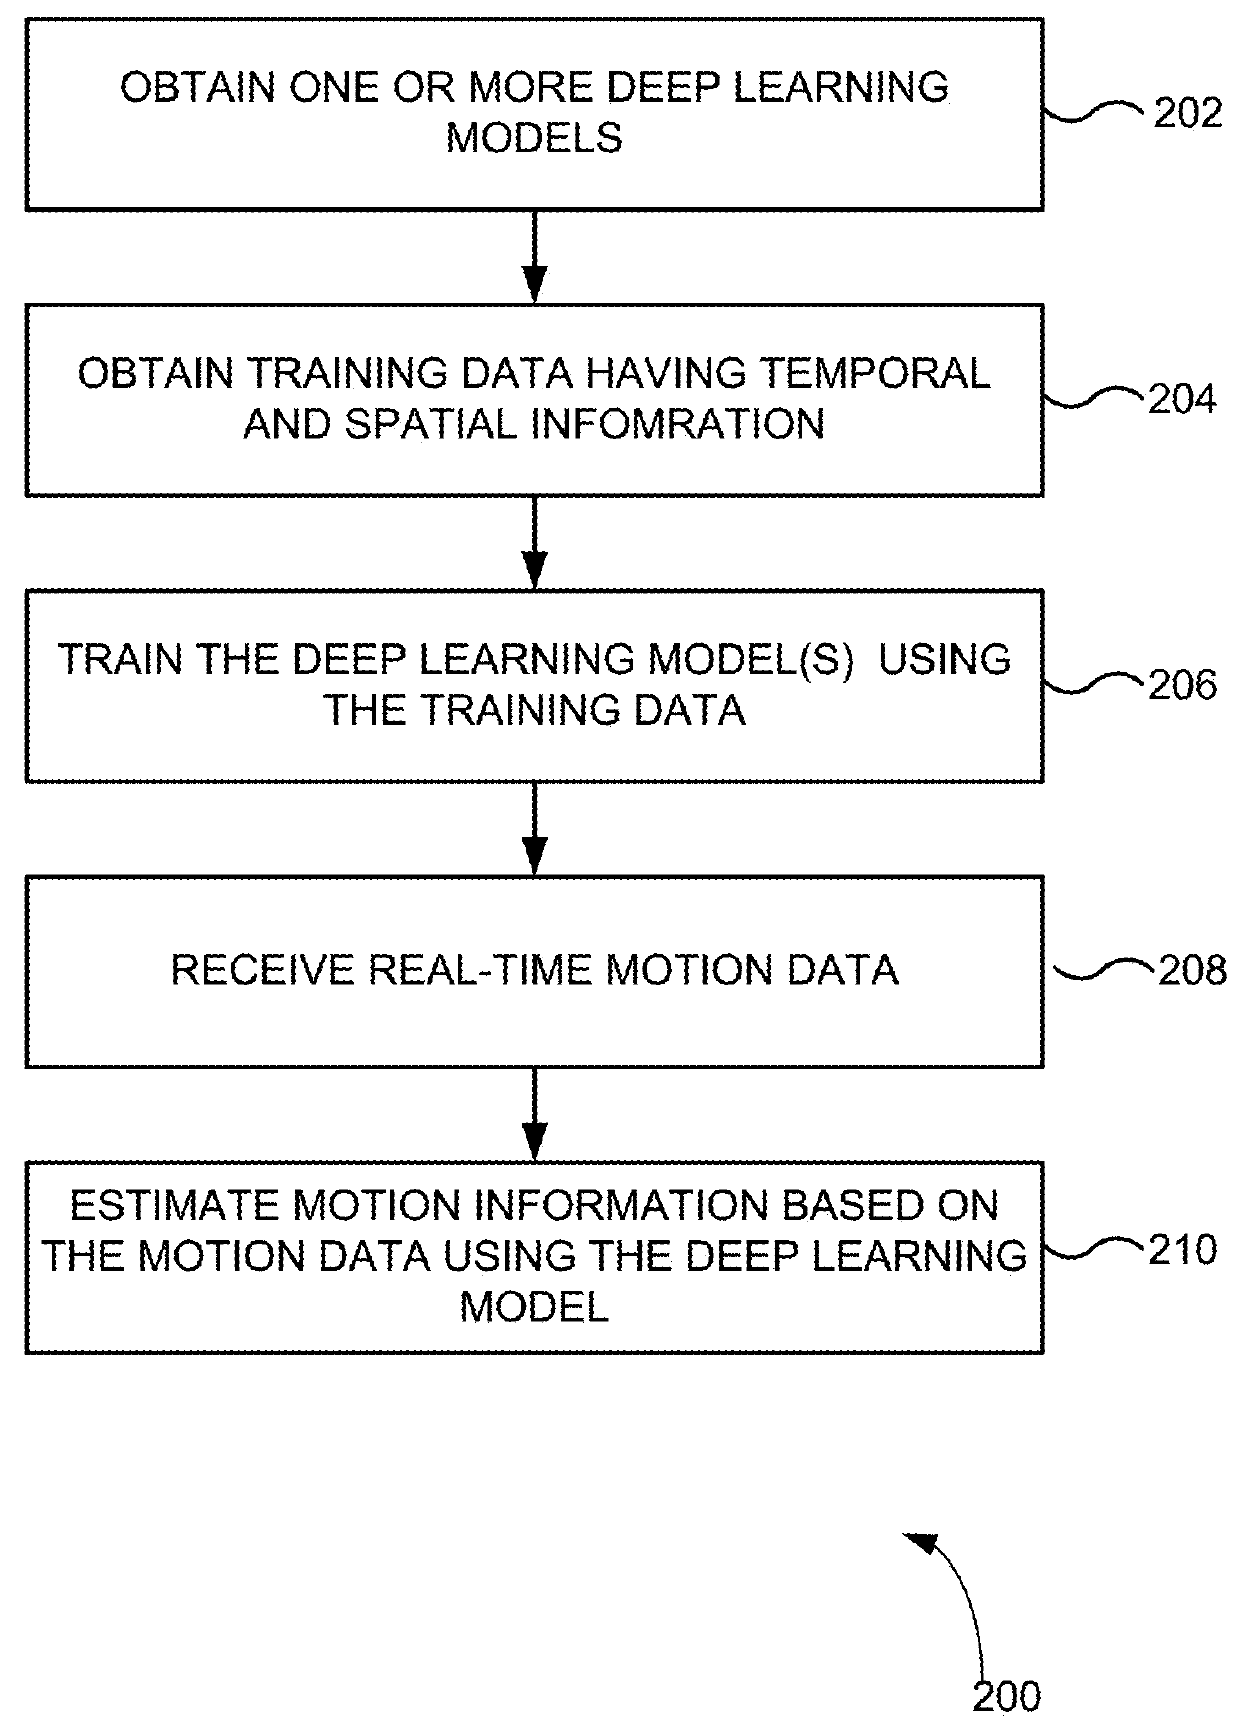 Deep-learning motion priors for full-body performance capture in real-time